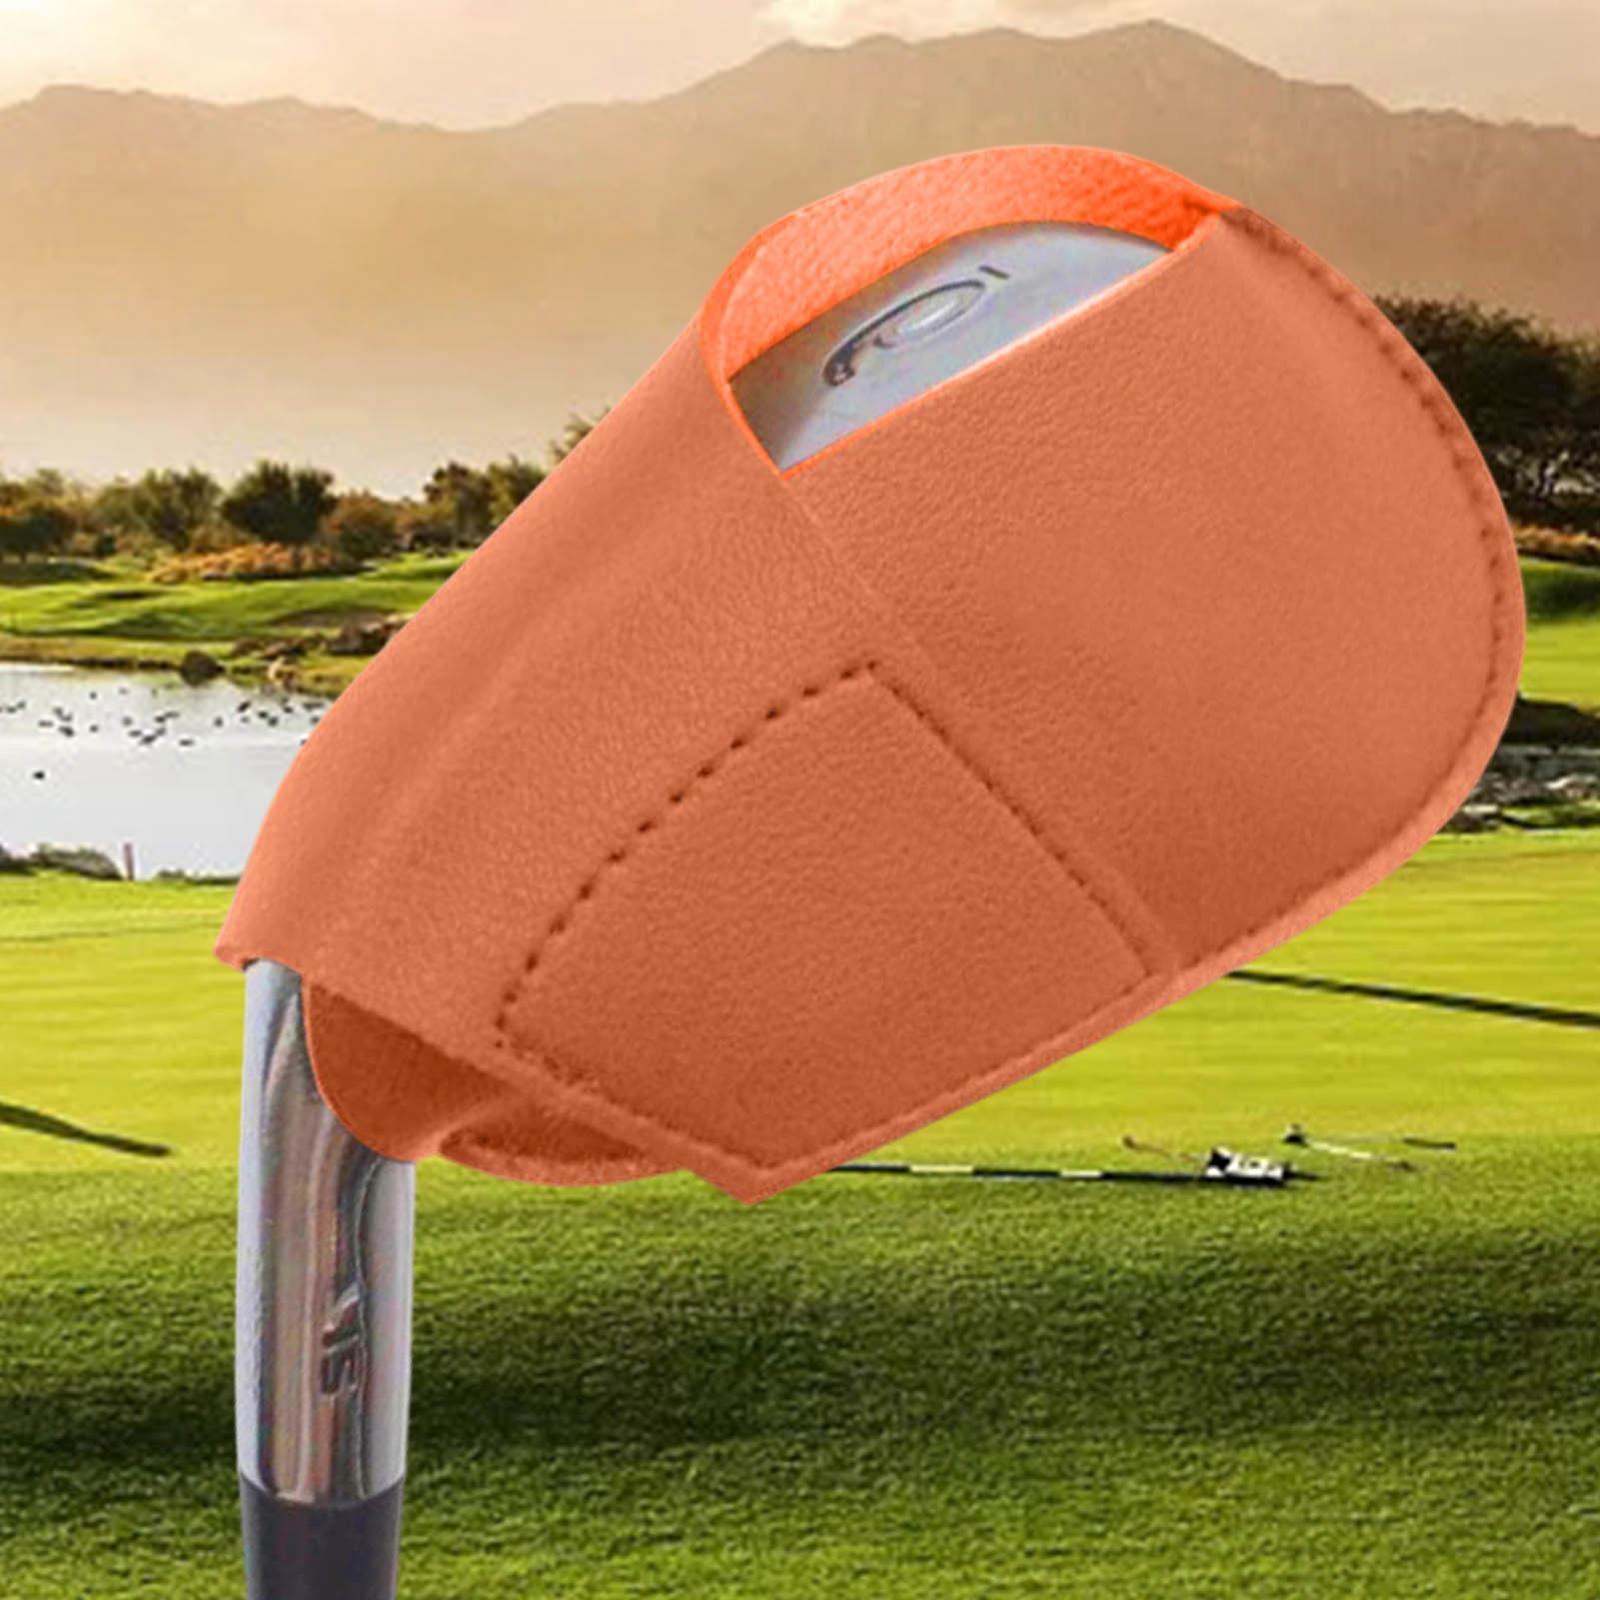 PU Leather Head Cover Protector Golf Iron Head Cover for Golf Brown